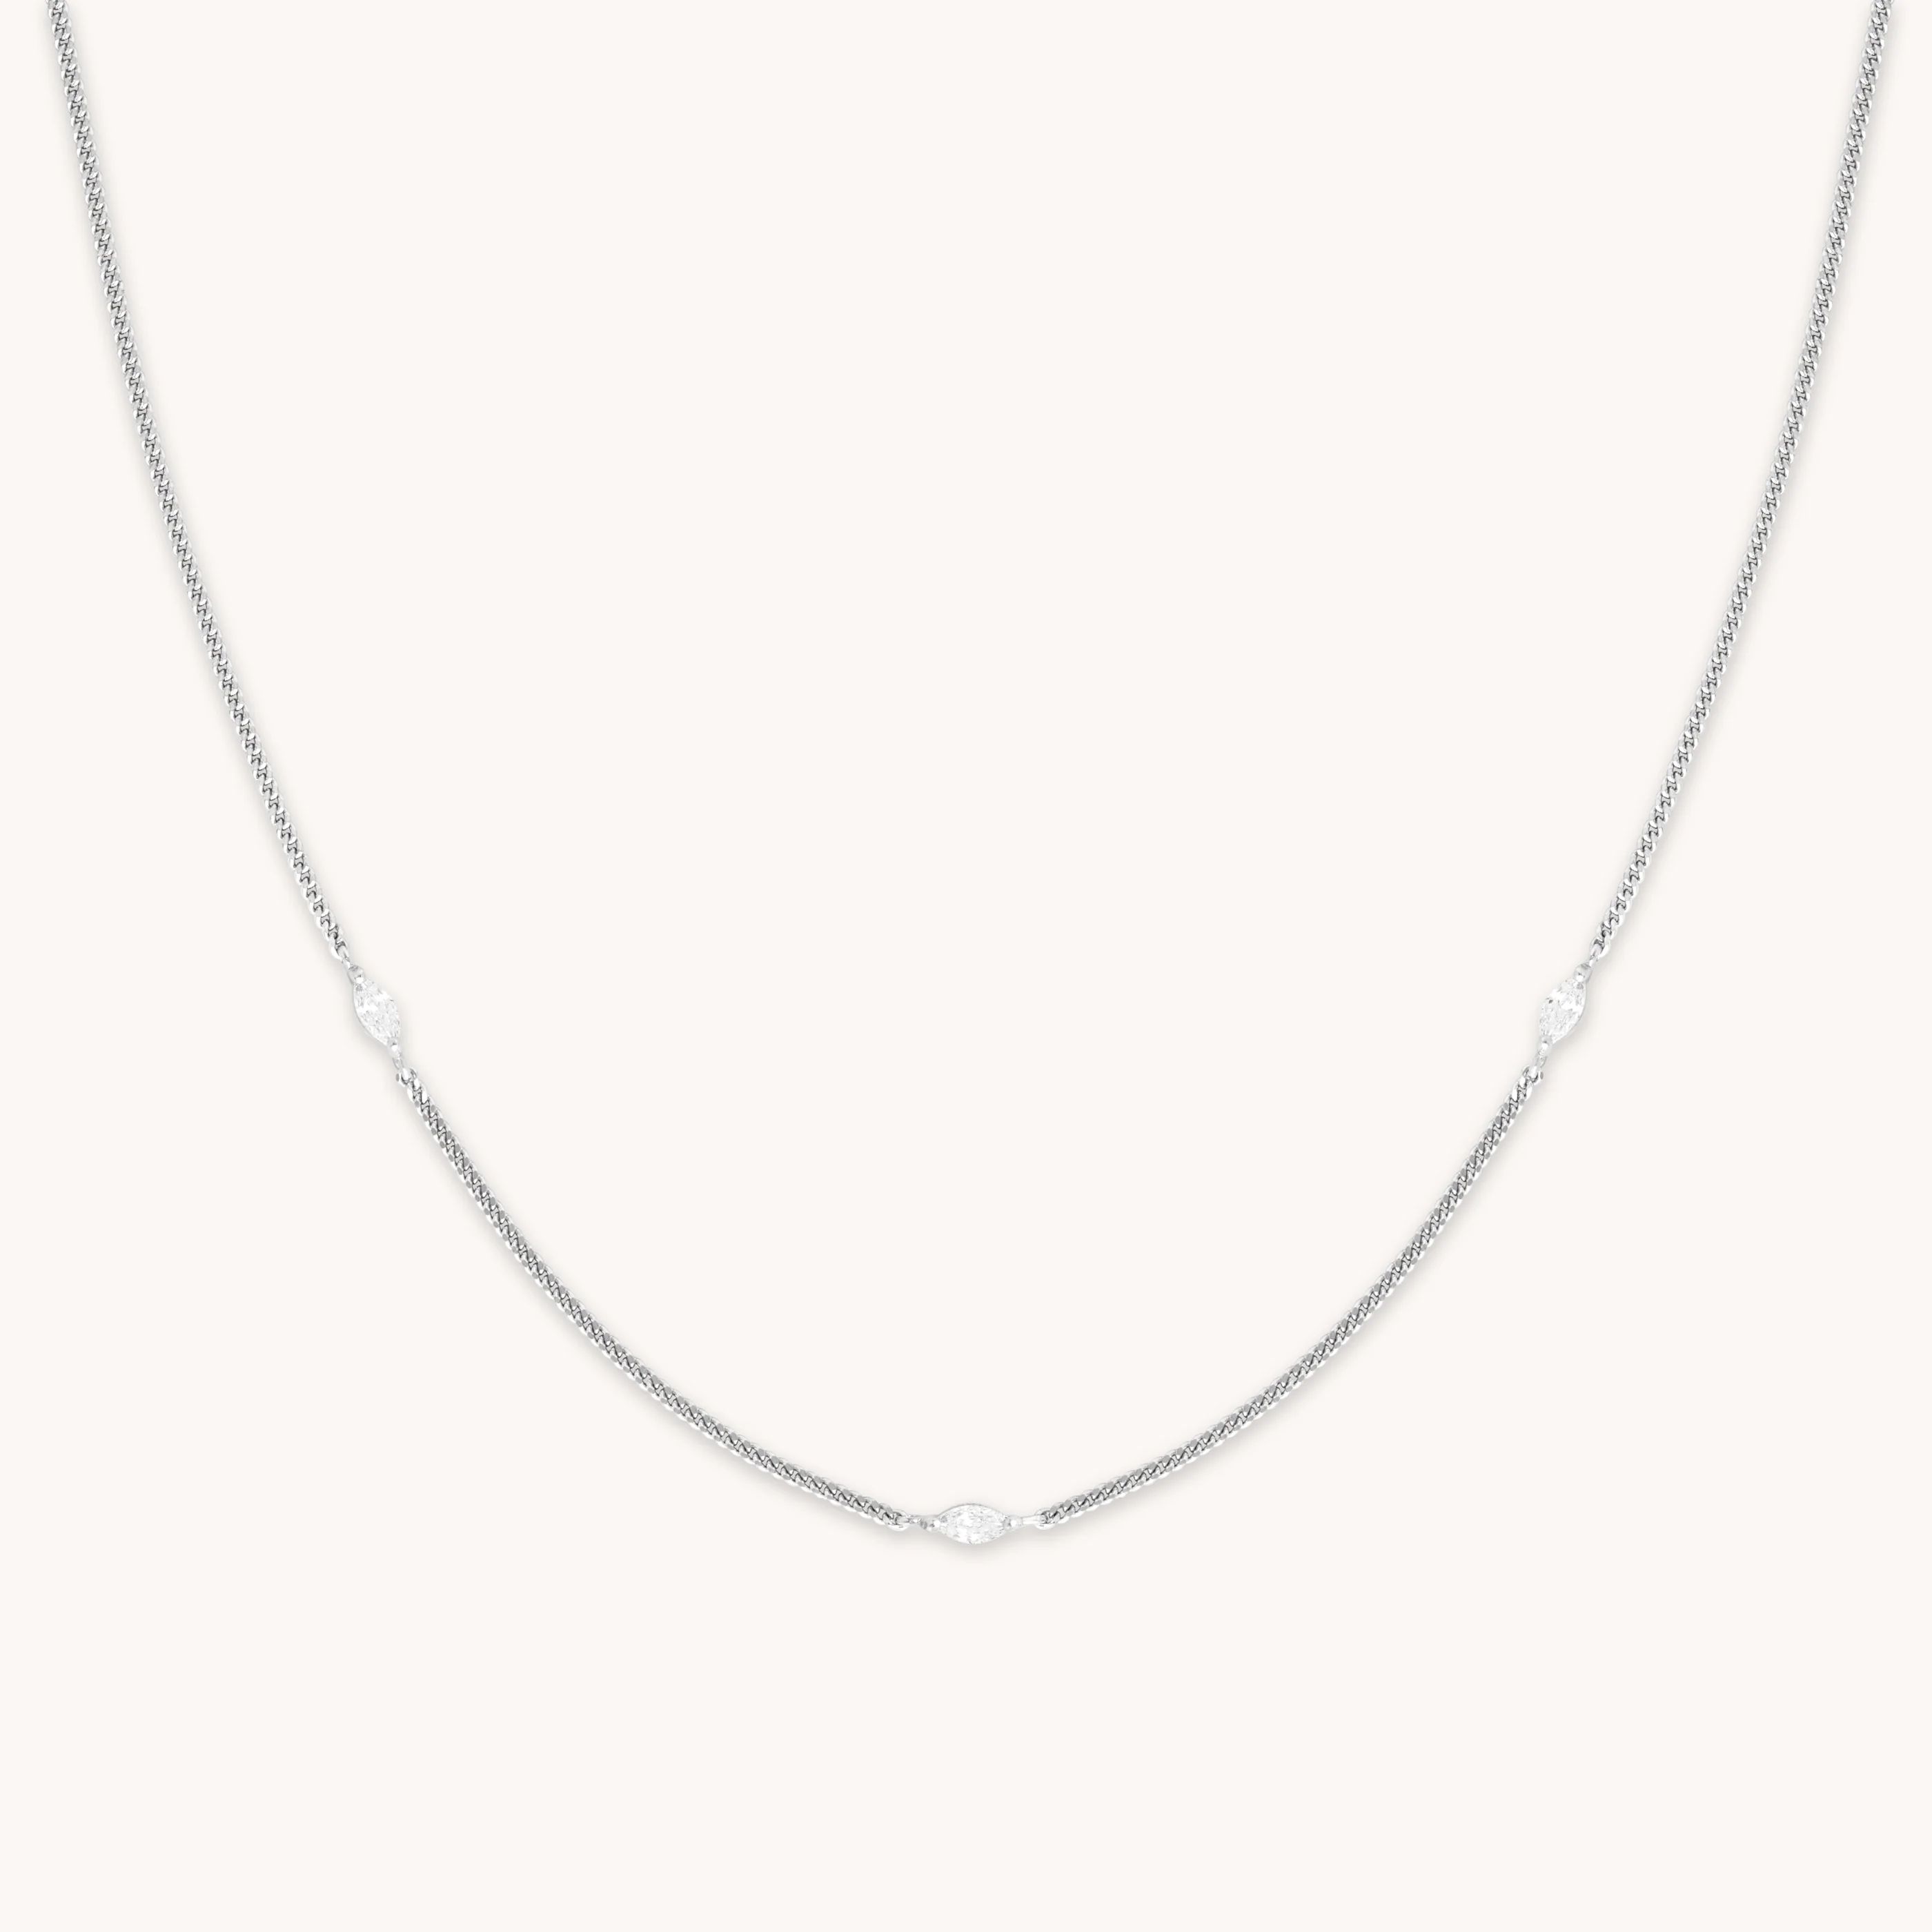 Navette Crystal Silver Chain Necklace | Astrid & Miyu Necklaces | Astrid and Miyu